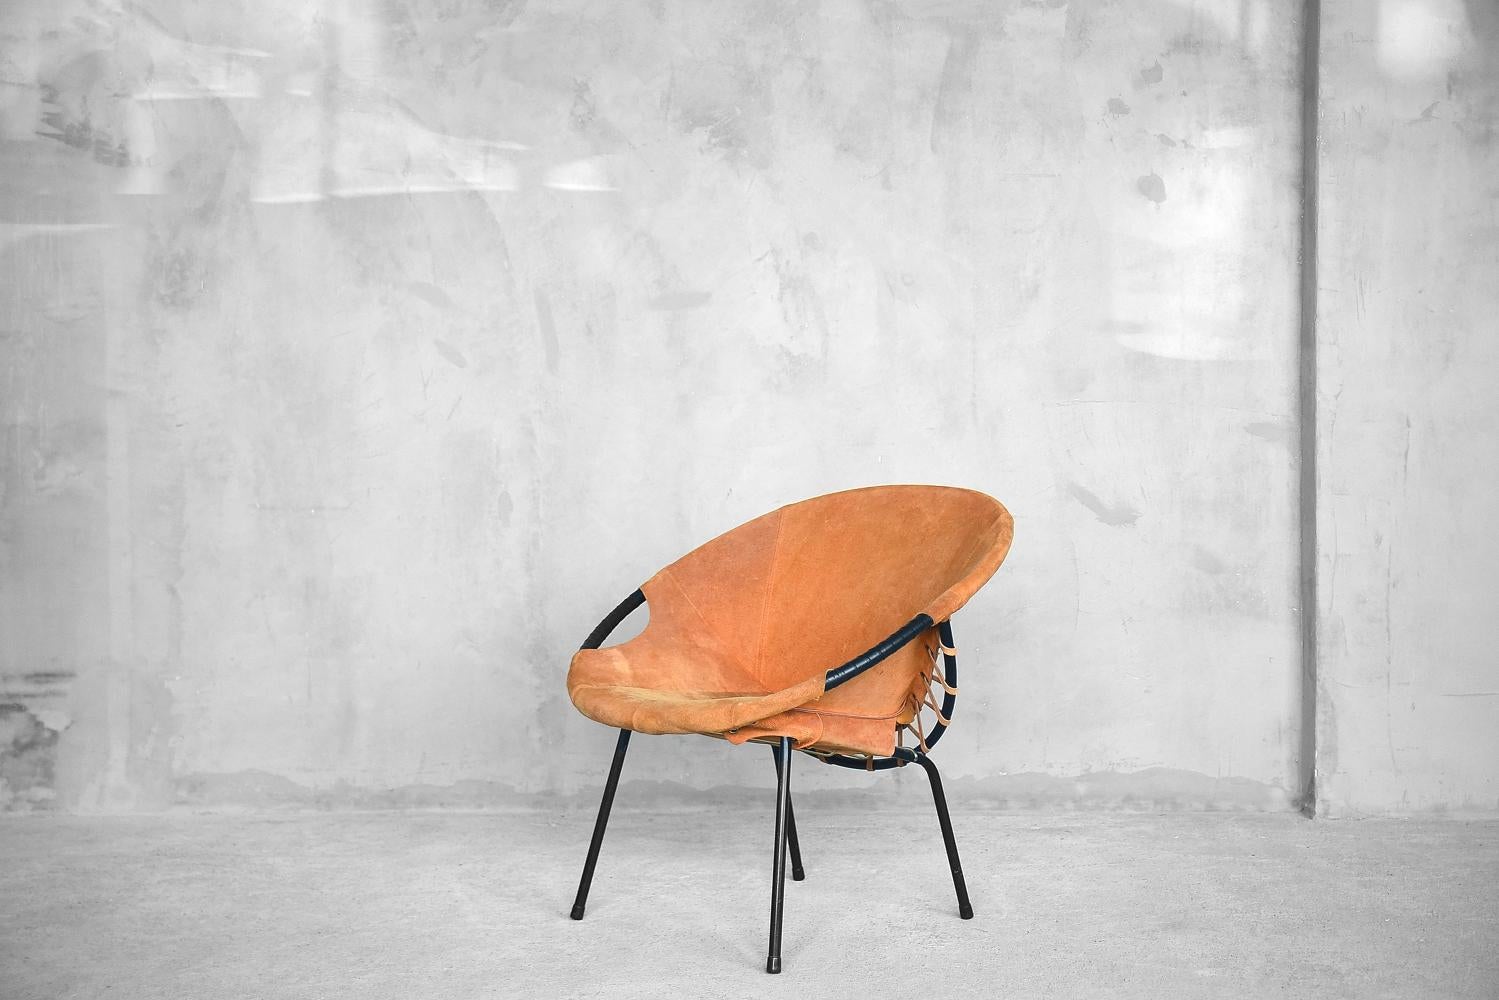 German Midcentury Circle Balloon Chair by Lusch Erzeugnis for Lusch & Co., 1960s For Sale